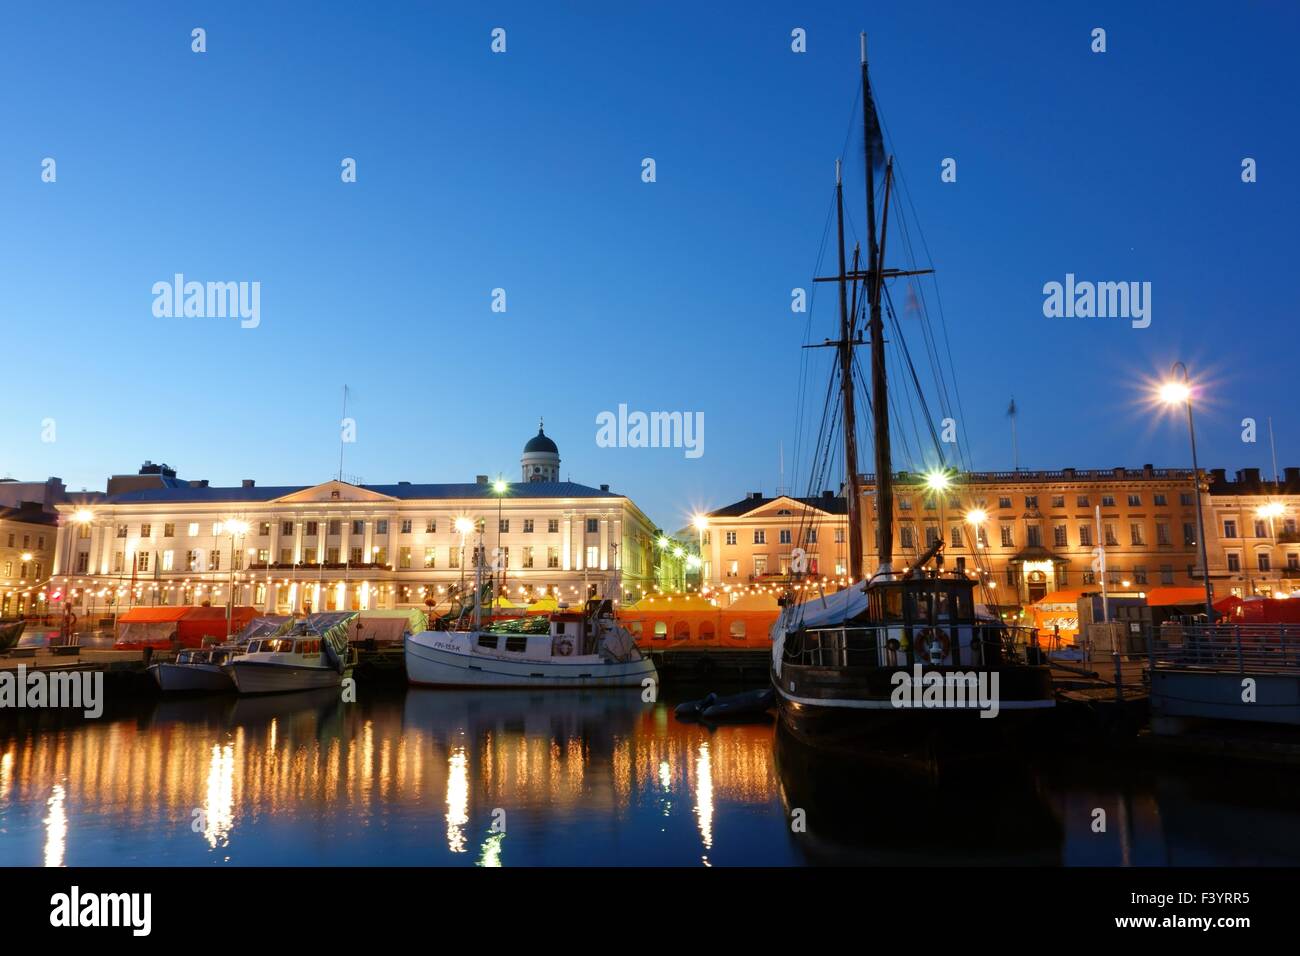 Herring fishing boats and a sailing ship at the Helsinki Market Square on early October evening during annual Helsinki Baltic Herring Fair. Stock Photo